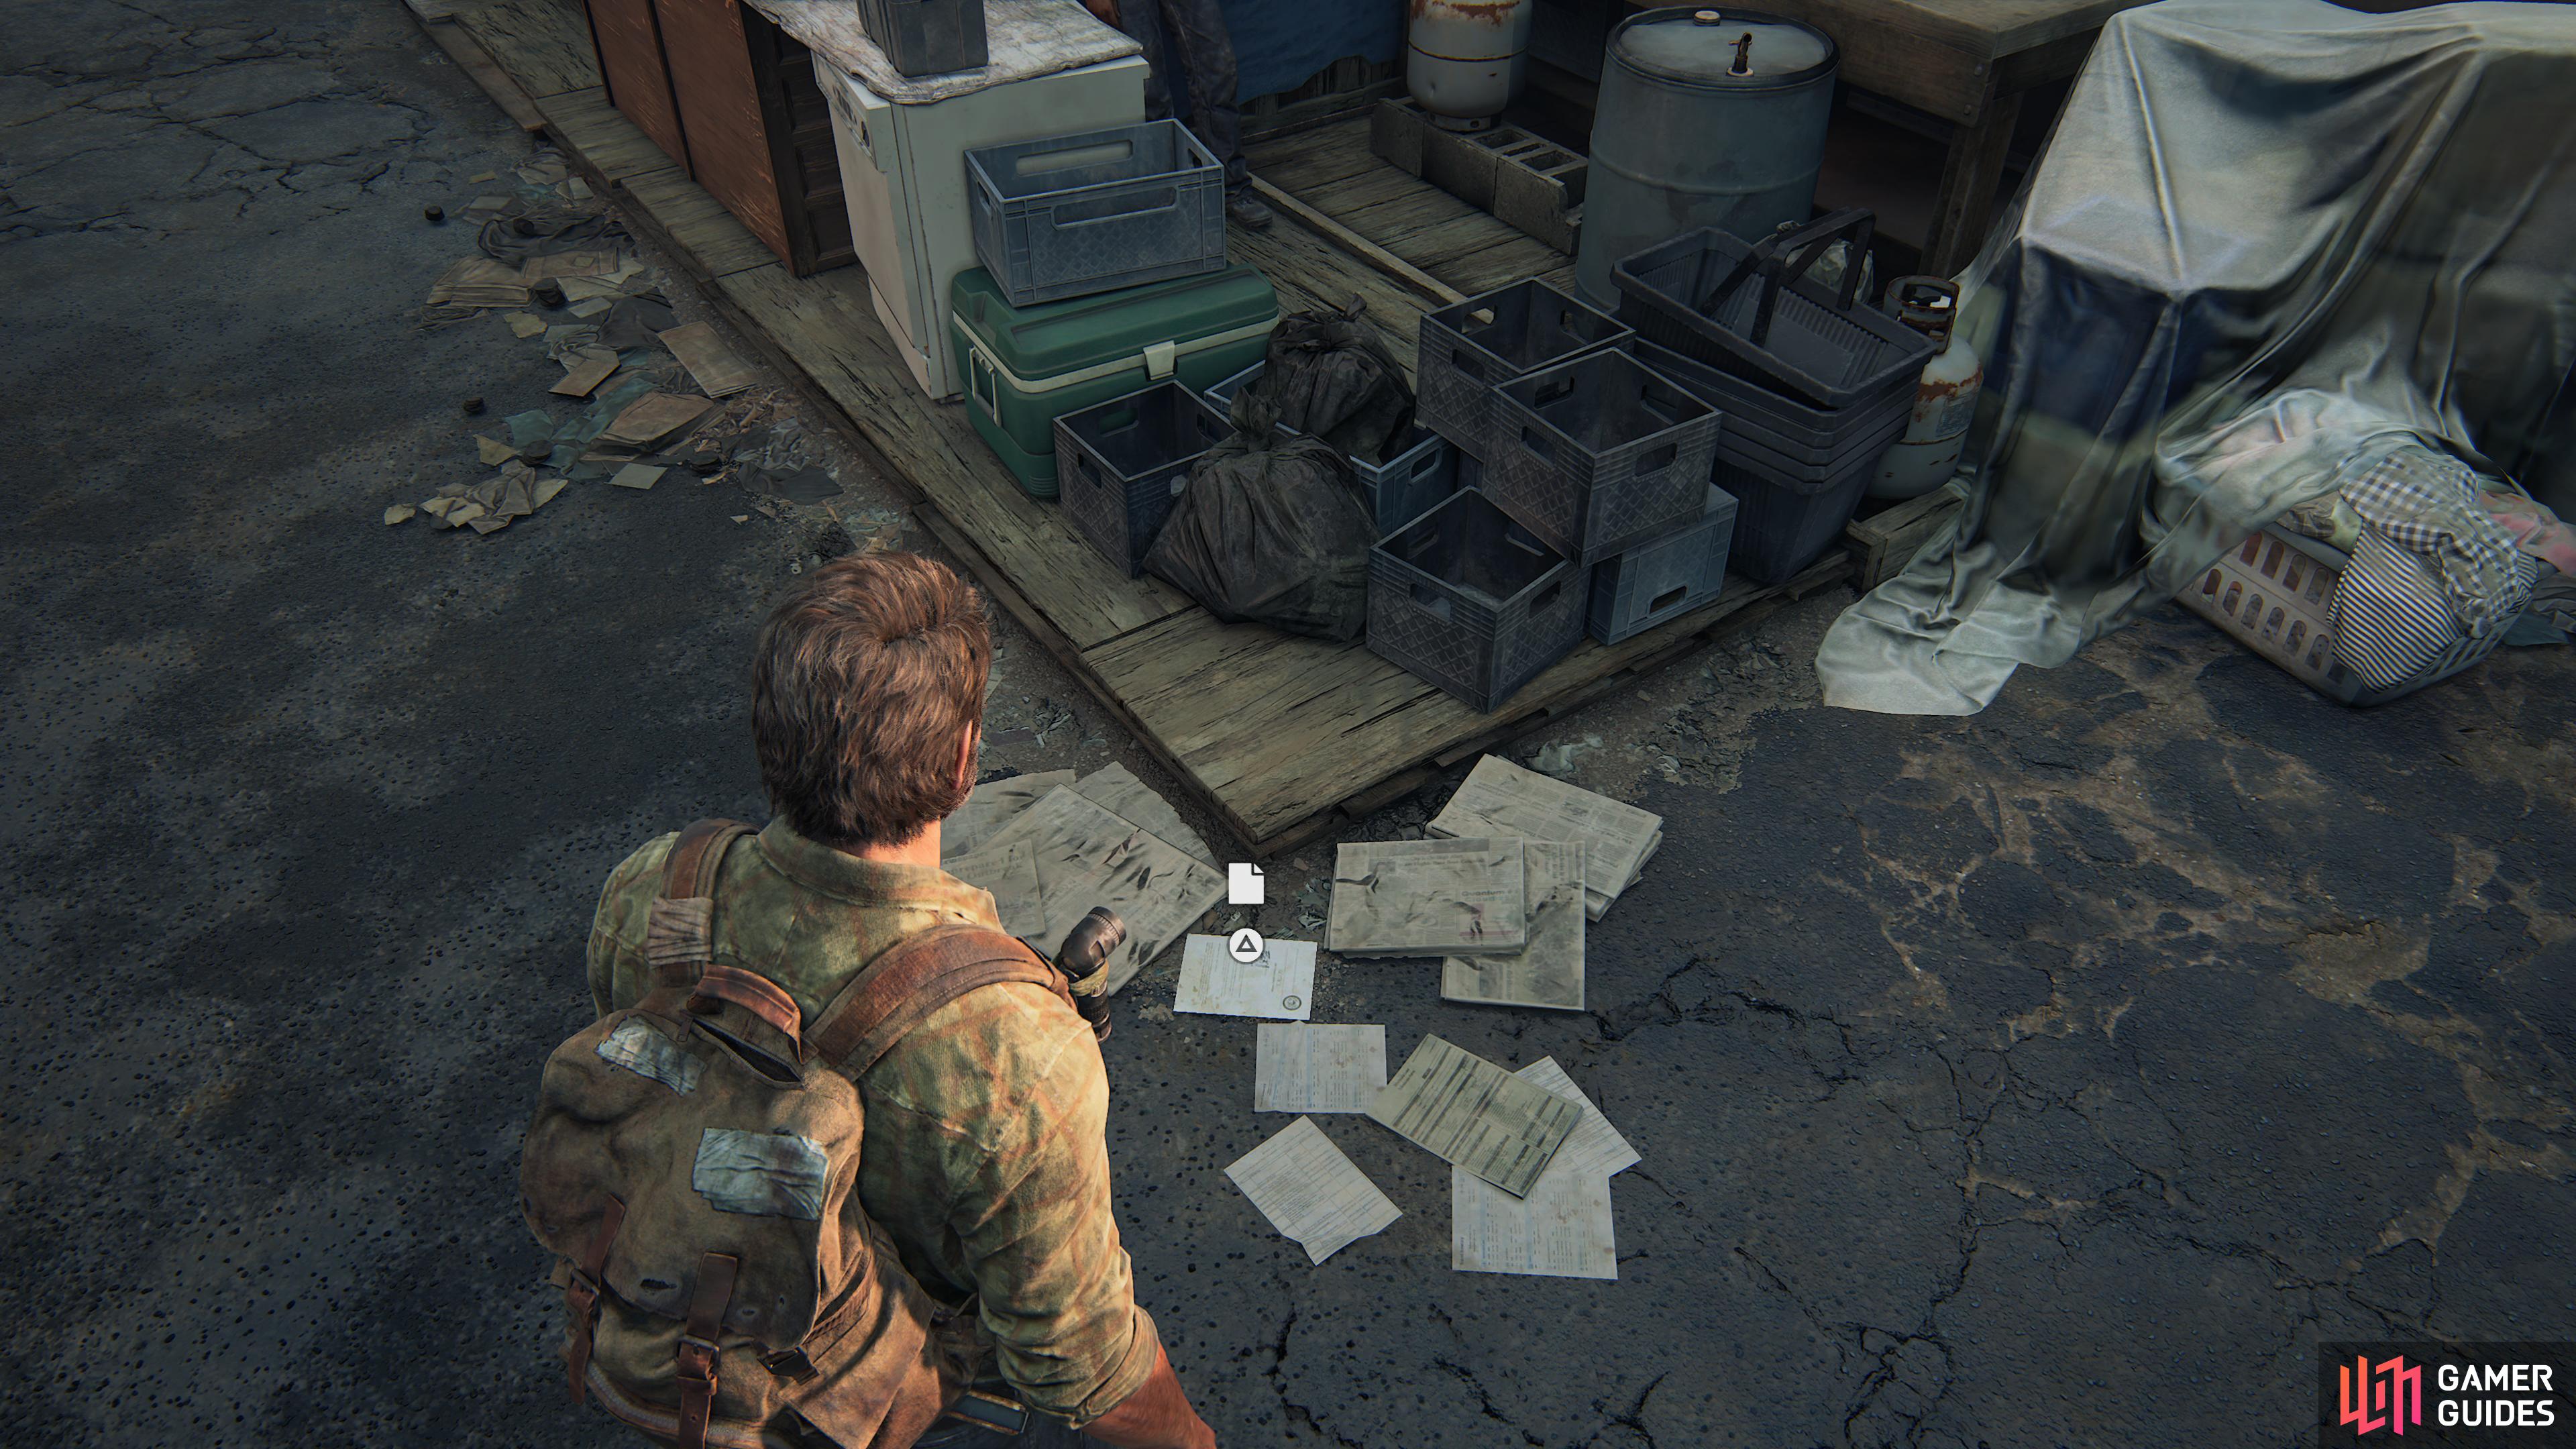 You can find the Drafting Notice on the floor